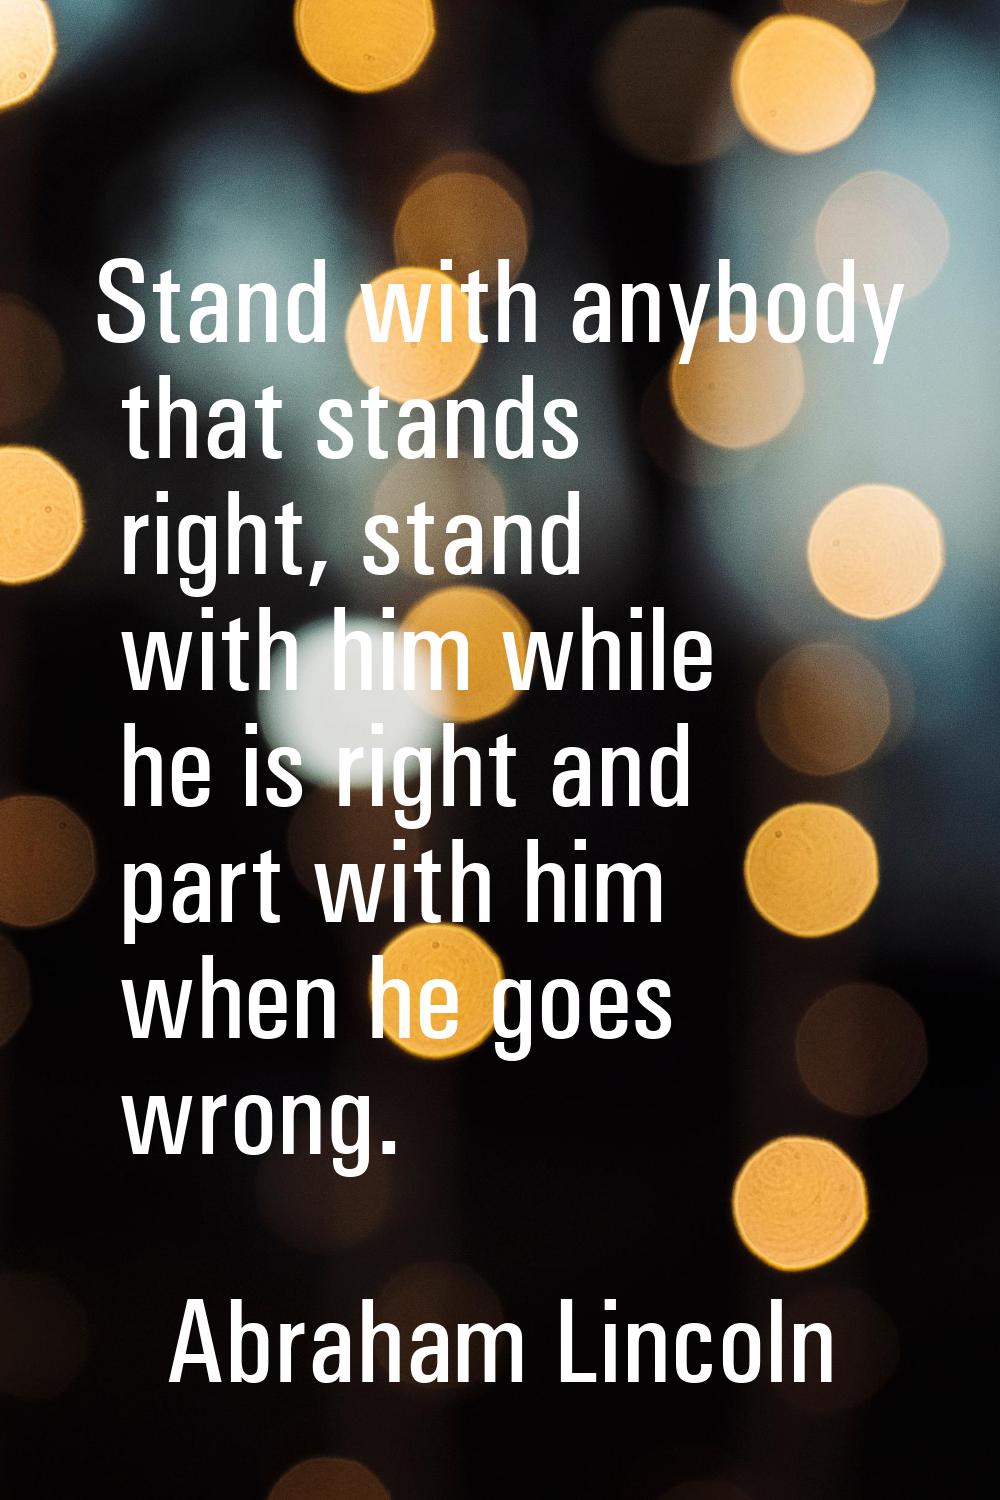 Stand with anybody that stands right, stand with him while he is right and part with him when he go